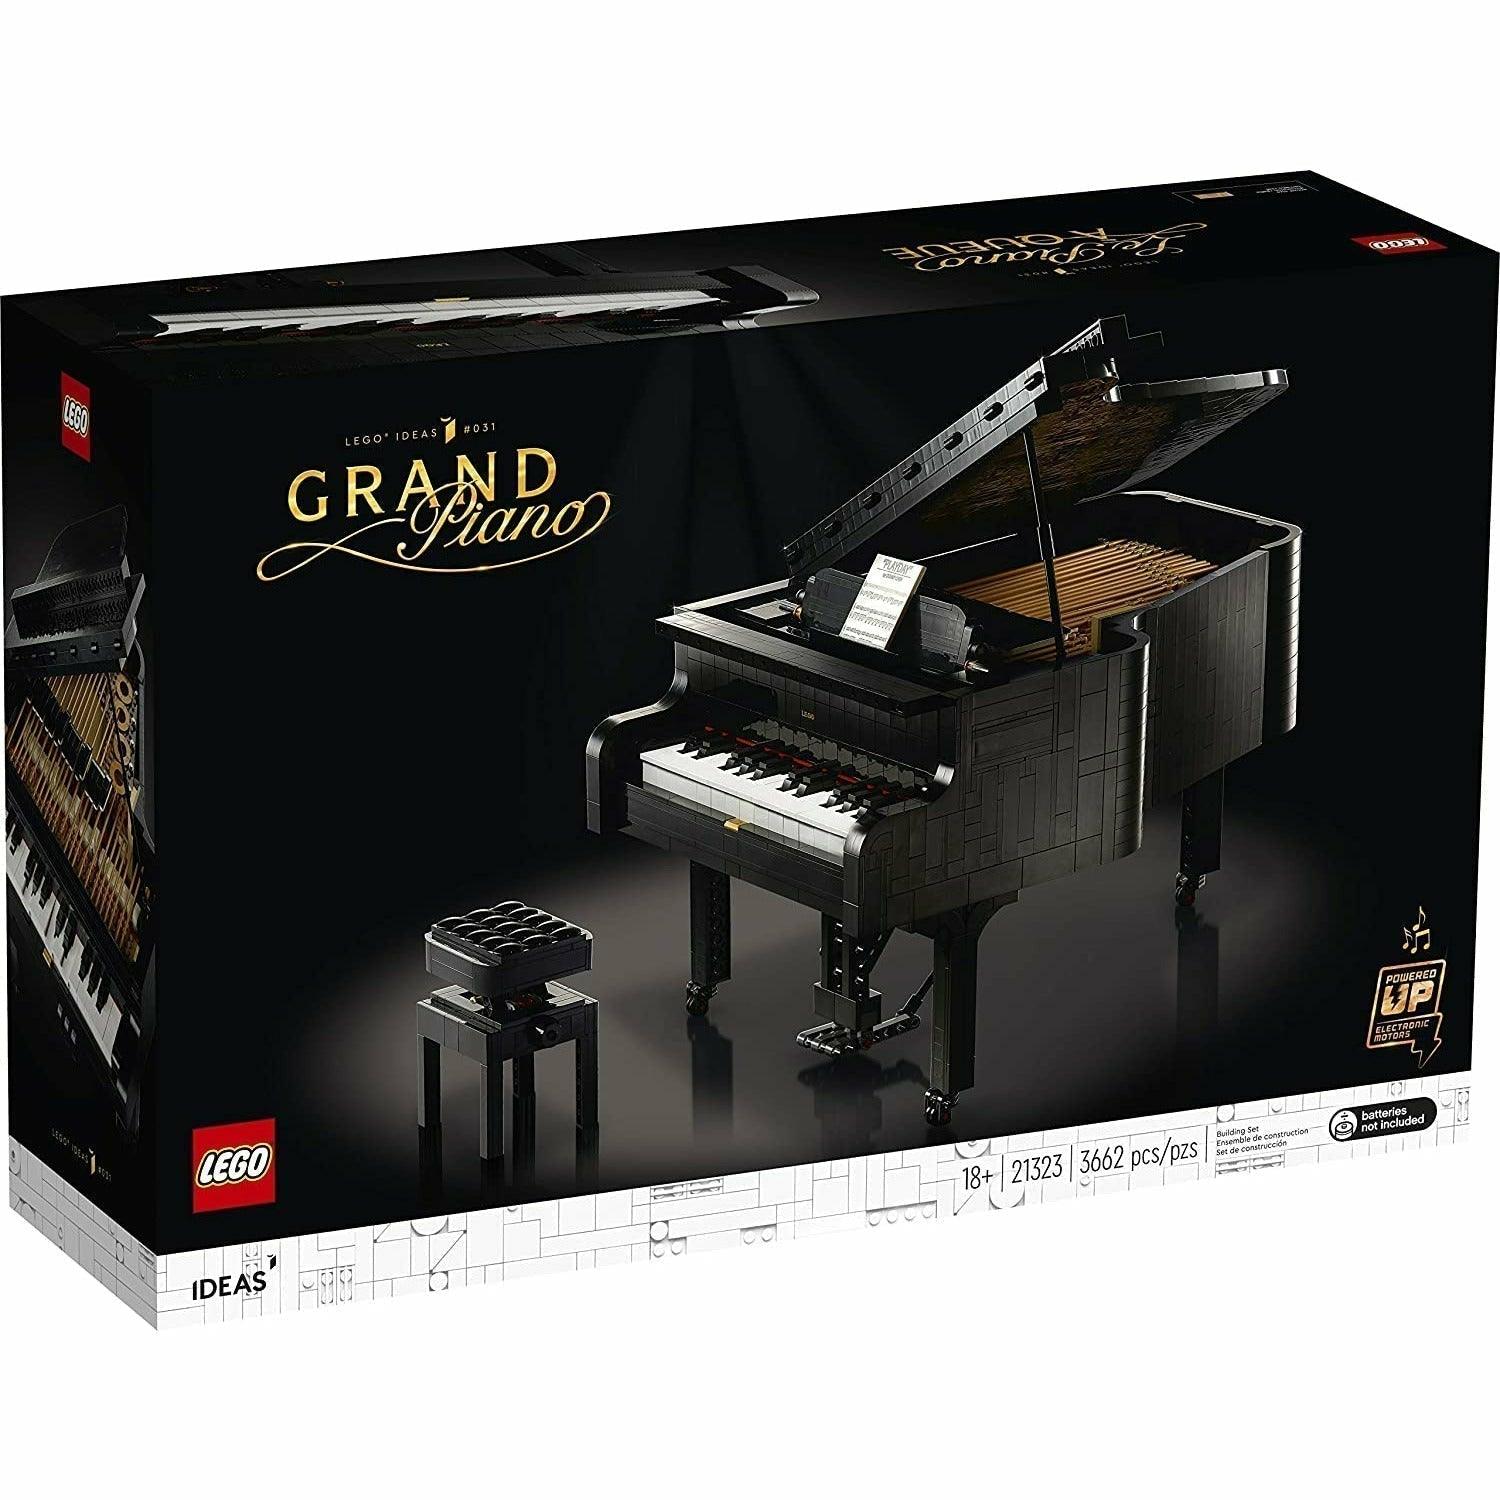 LEGO Ideas Grand Piano 21323 Model Building Kit, Build Your Own Playable Grand Piano, an Exciting DIY Project for The Pianist, (3,662 Pieces) - BumbleToys - 18+, Boys, Girls, Ideas, LEGO, Musical Instruments, OXE, Pre-Order